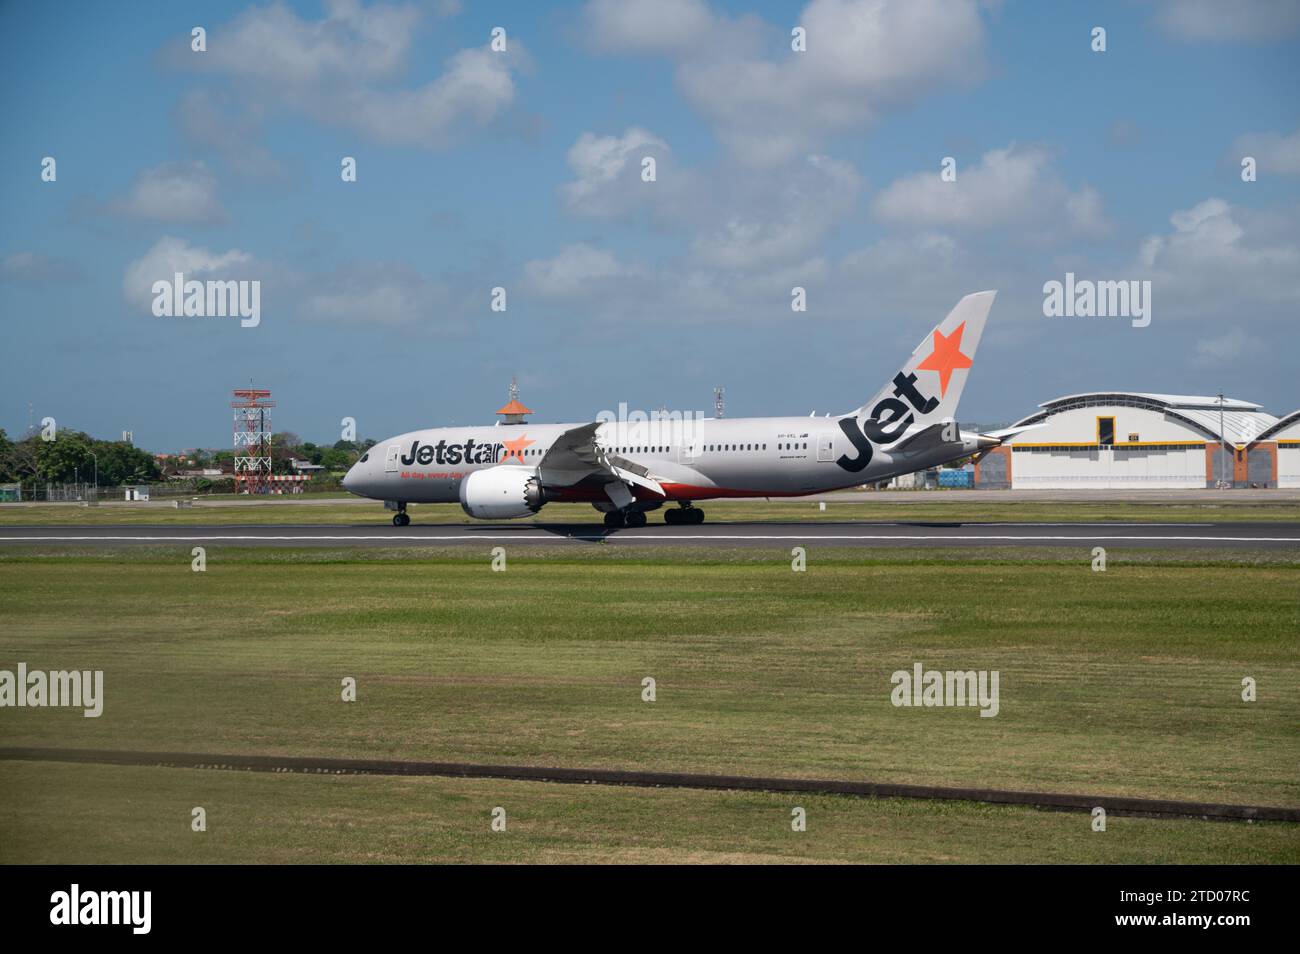 25.07.2023, Denpasar, Bali, Indonesia, Asia - A Boeing 787-8 Dreamliner passenger aircraft of the Australian airline Jetstar Airways takes off. Stock Photo